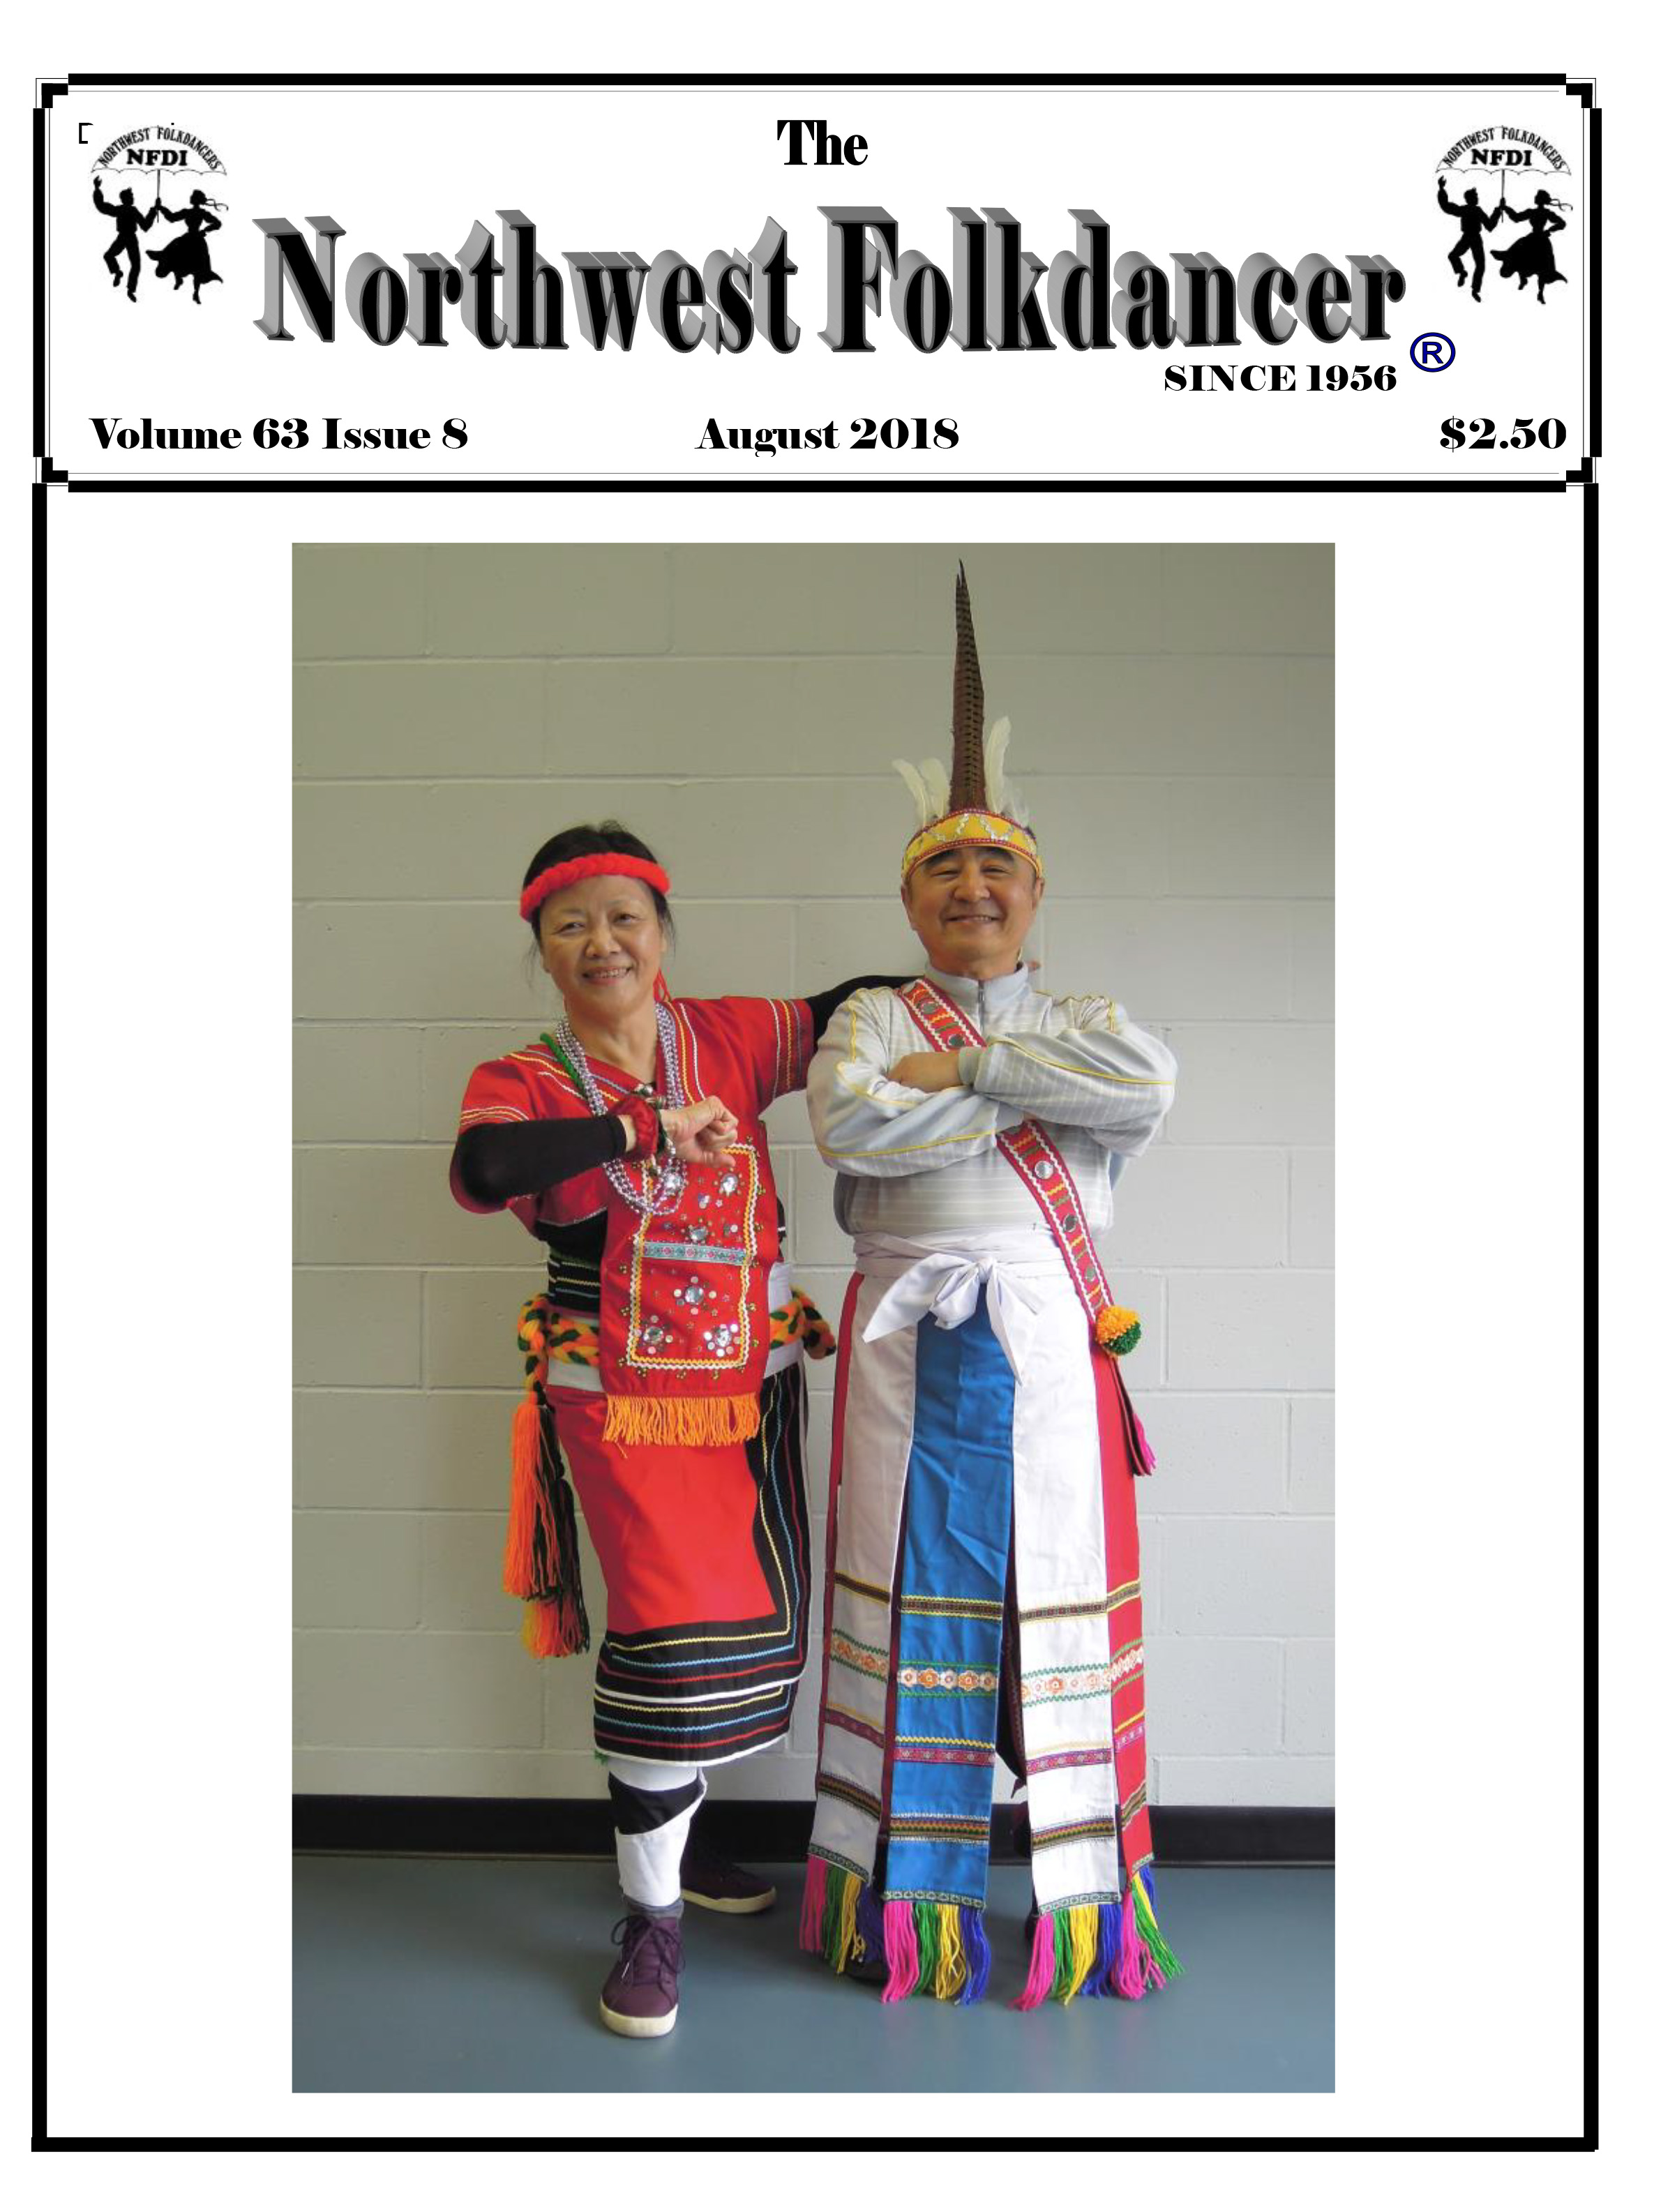 Front Page from NFDI 08_18 re new SIFD members